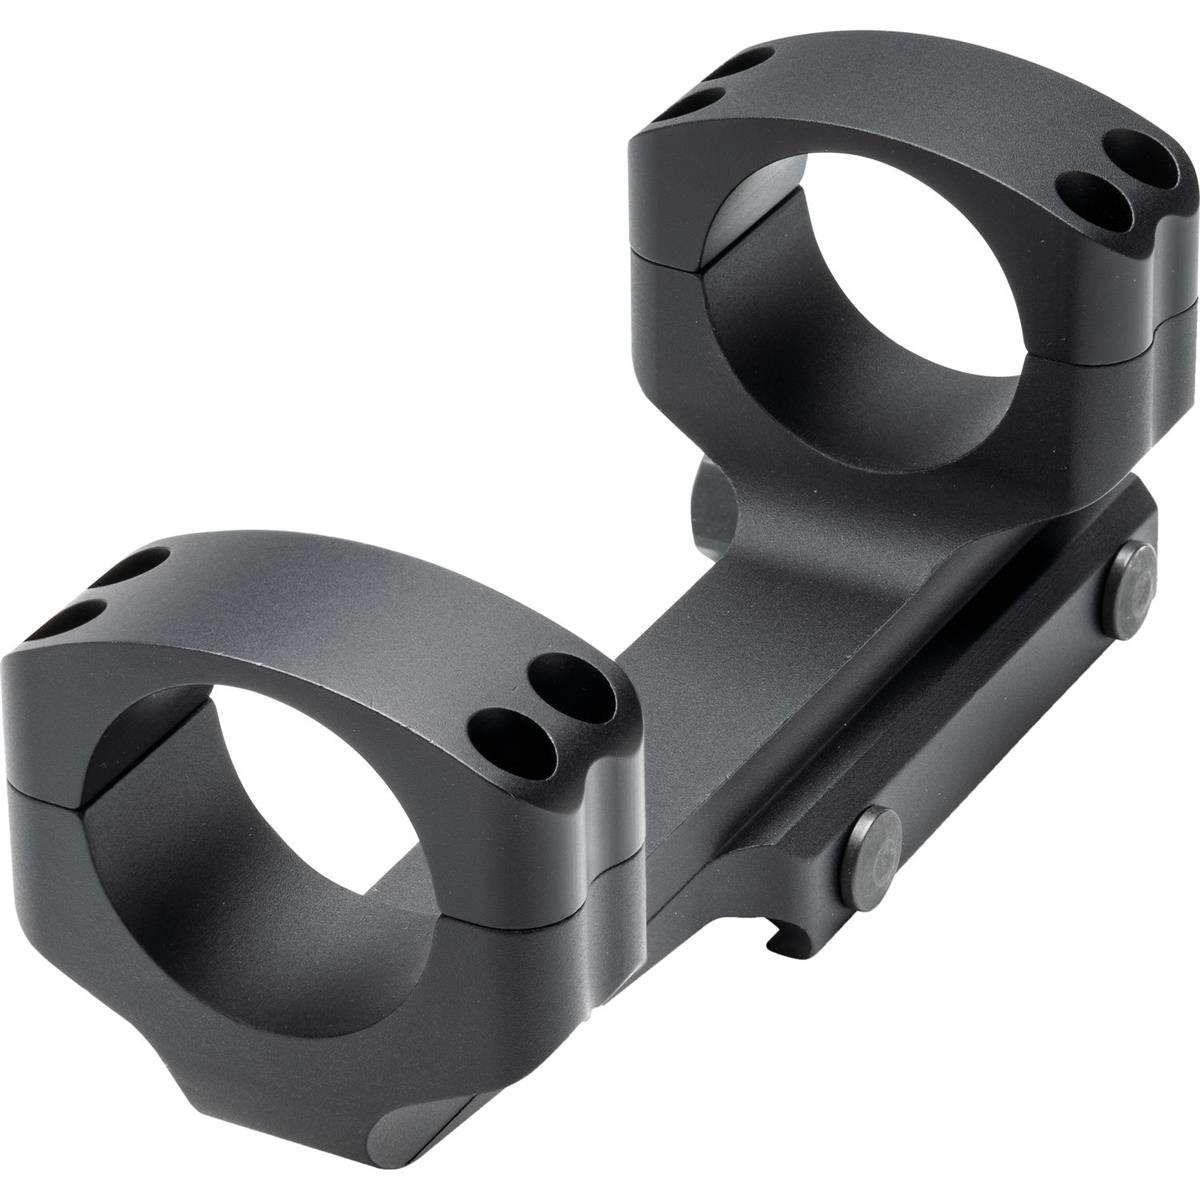 

Steiner P Series MSR Cantilevered Riflescope Mount with 34mm Rings